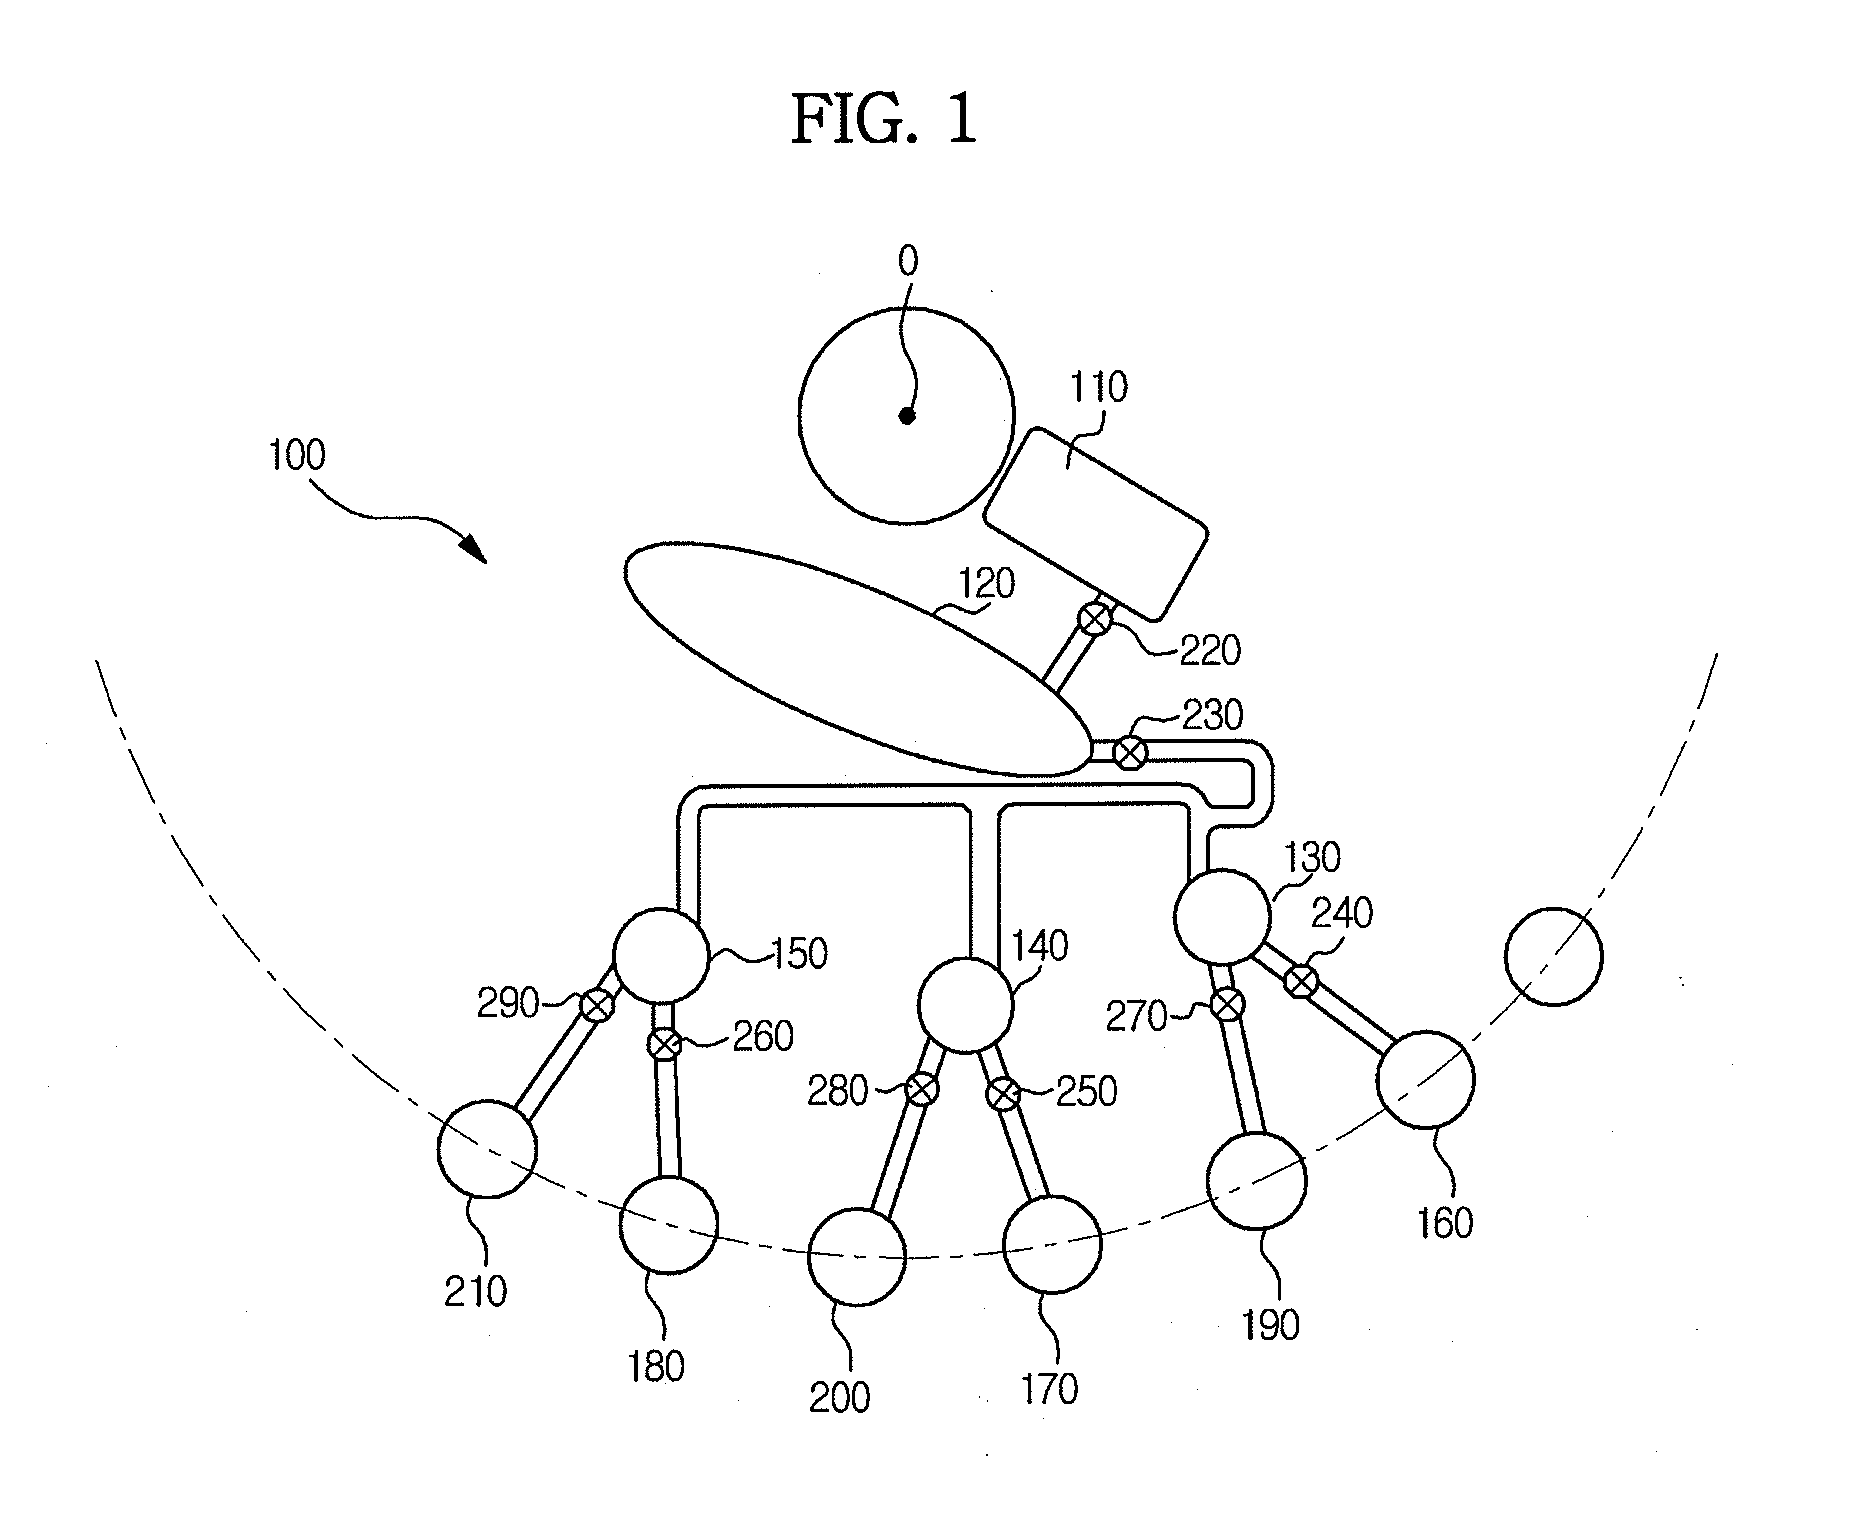 Centrifugal micro-fluidic structure for measuring glycated hemoglobin, centrifugal micro-fluidic device for measuring glycated hemoglobin, and method for measuring glycated hemoglobin